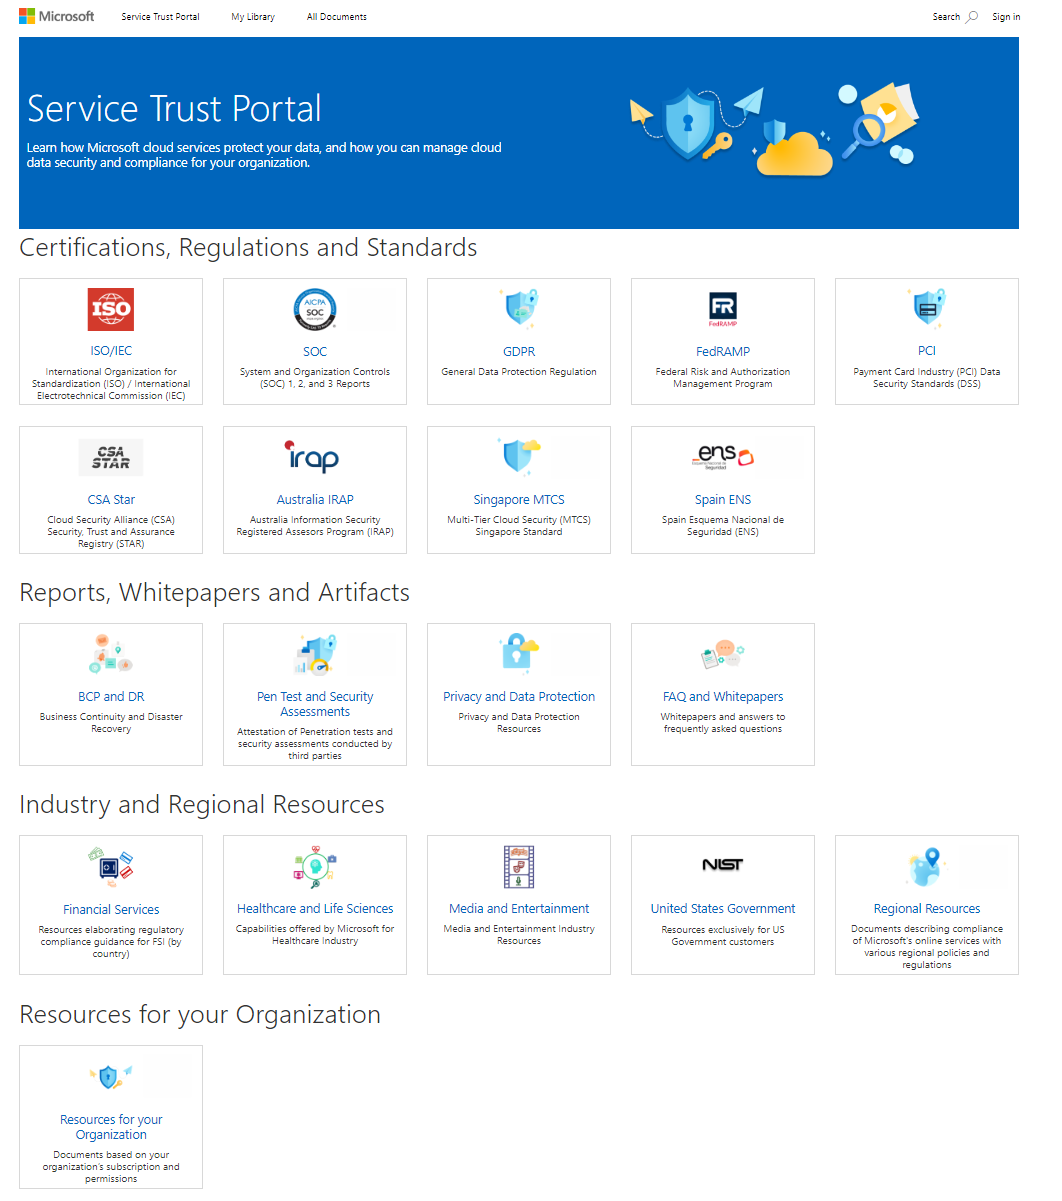 Screenshot of the Service Trust Portal home page.